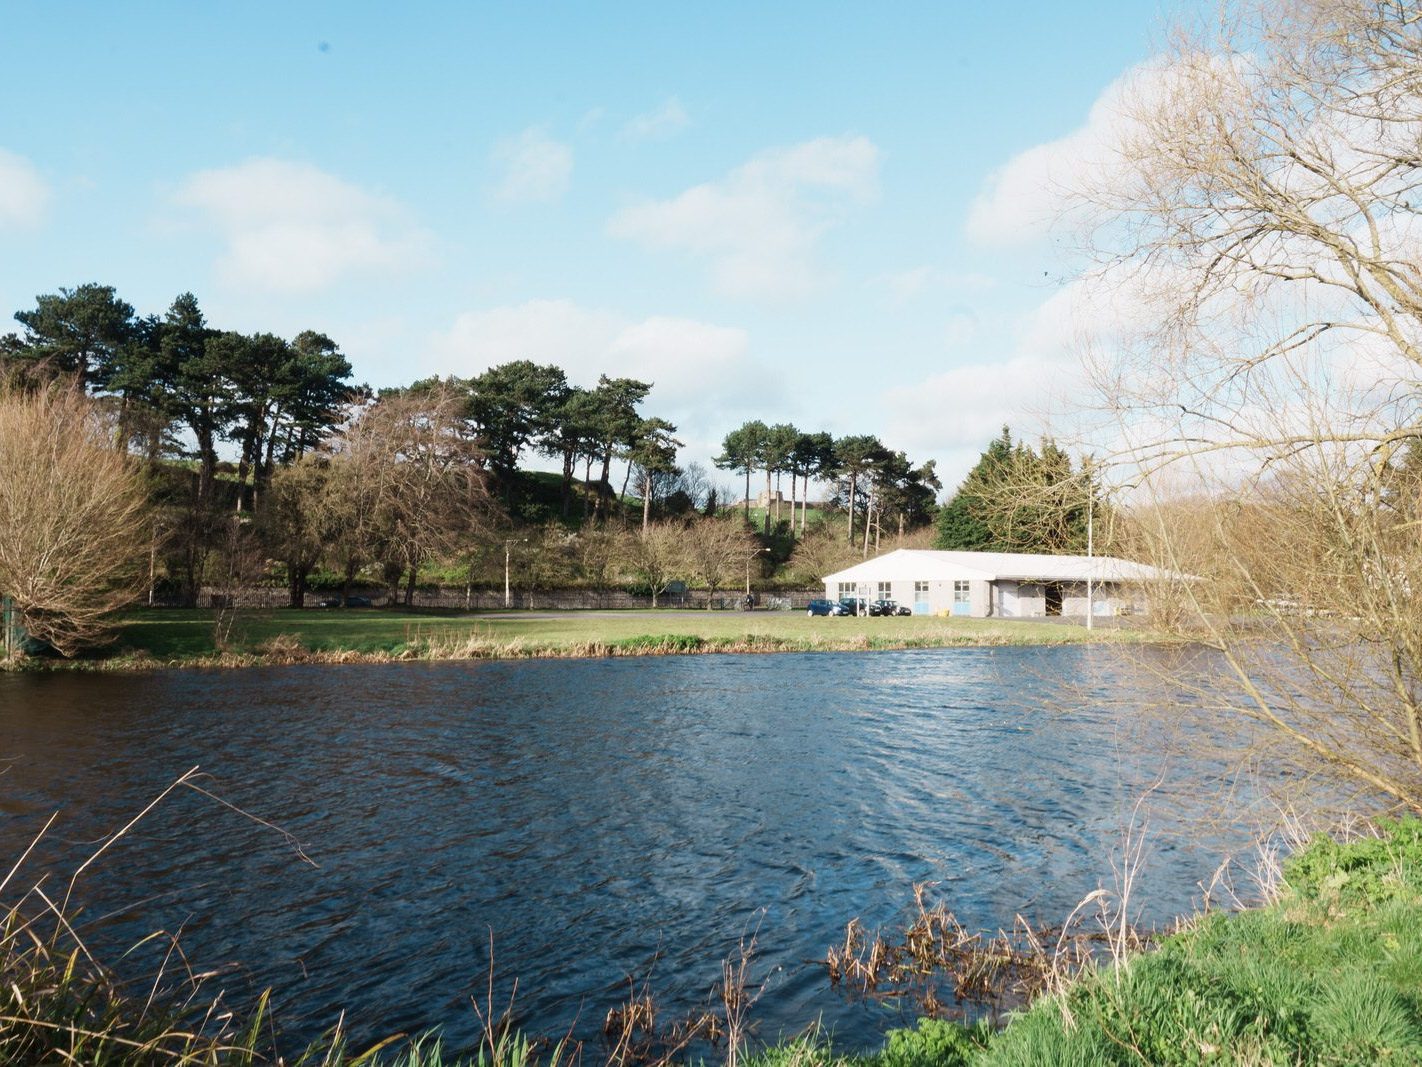 THE PARKLAND ALONG THE LIFFEY [AT ISLANDBRIDGE ACROSS FROM THE ROWING CLUBS]-223106-1